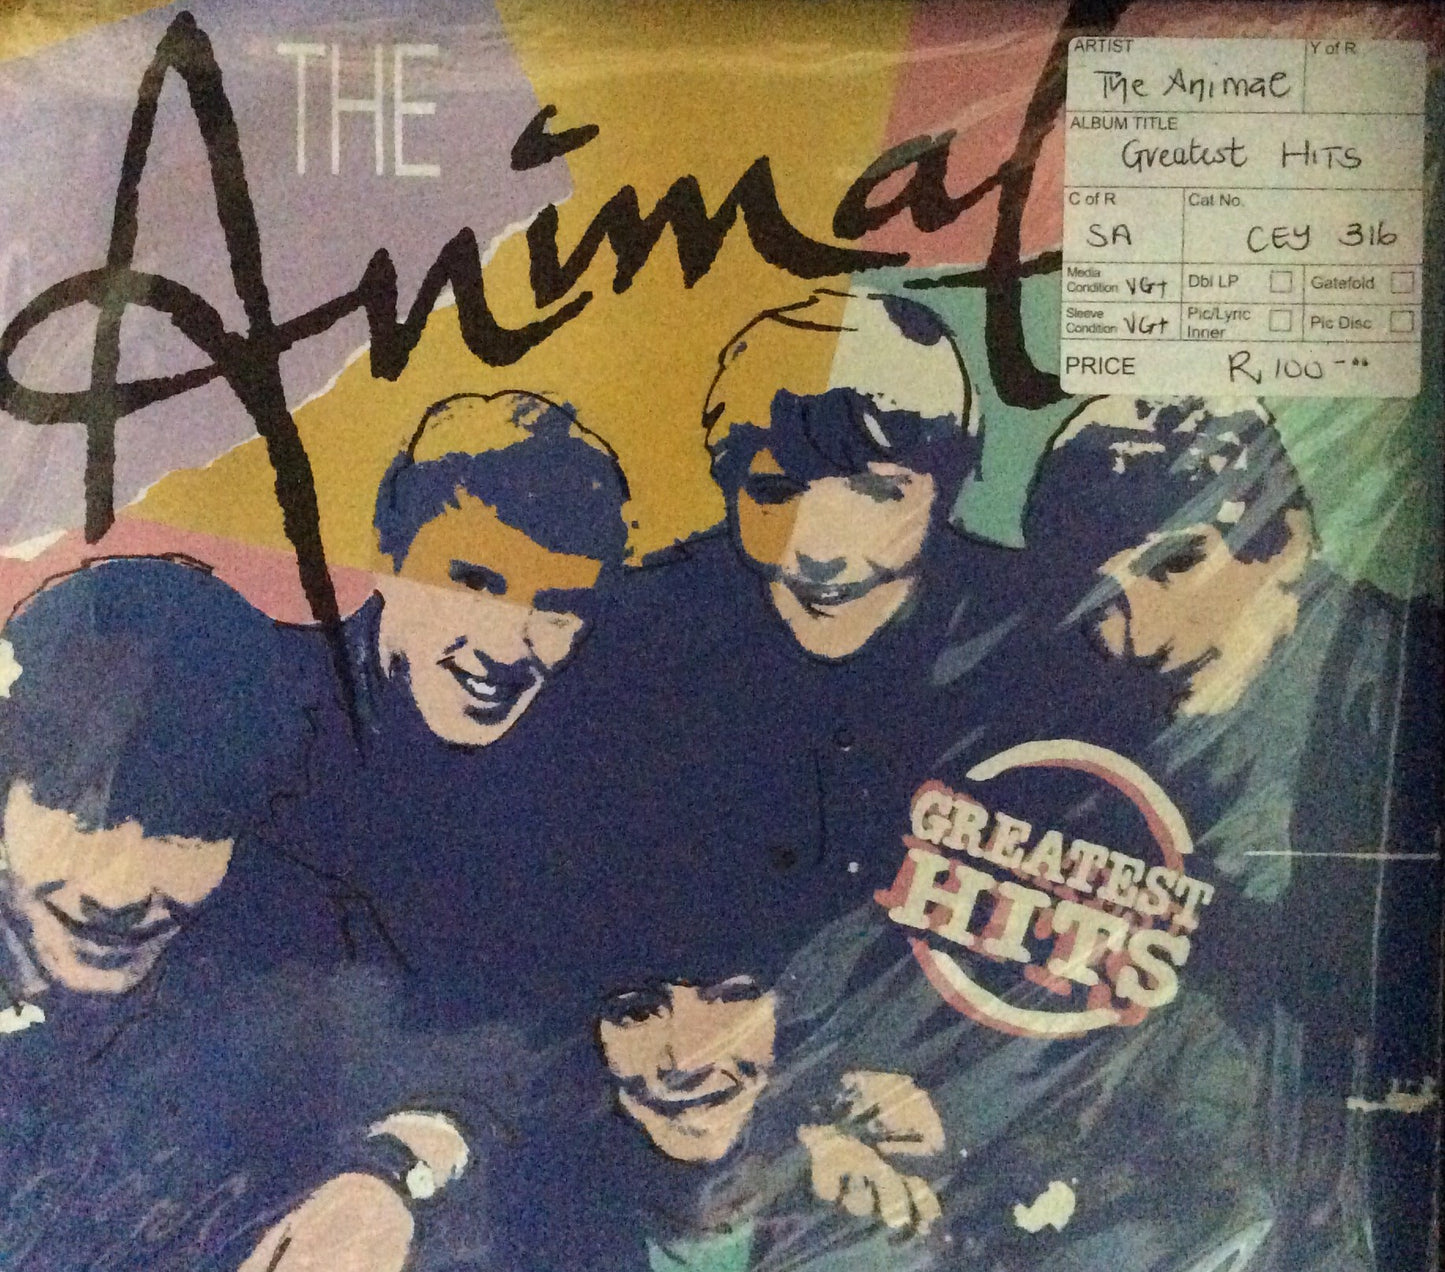 Animals, The - Greatest Hits